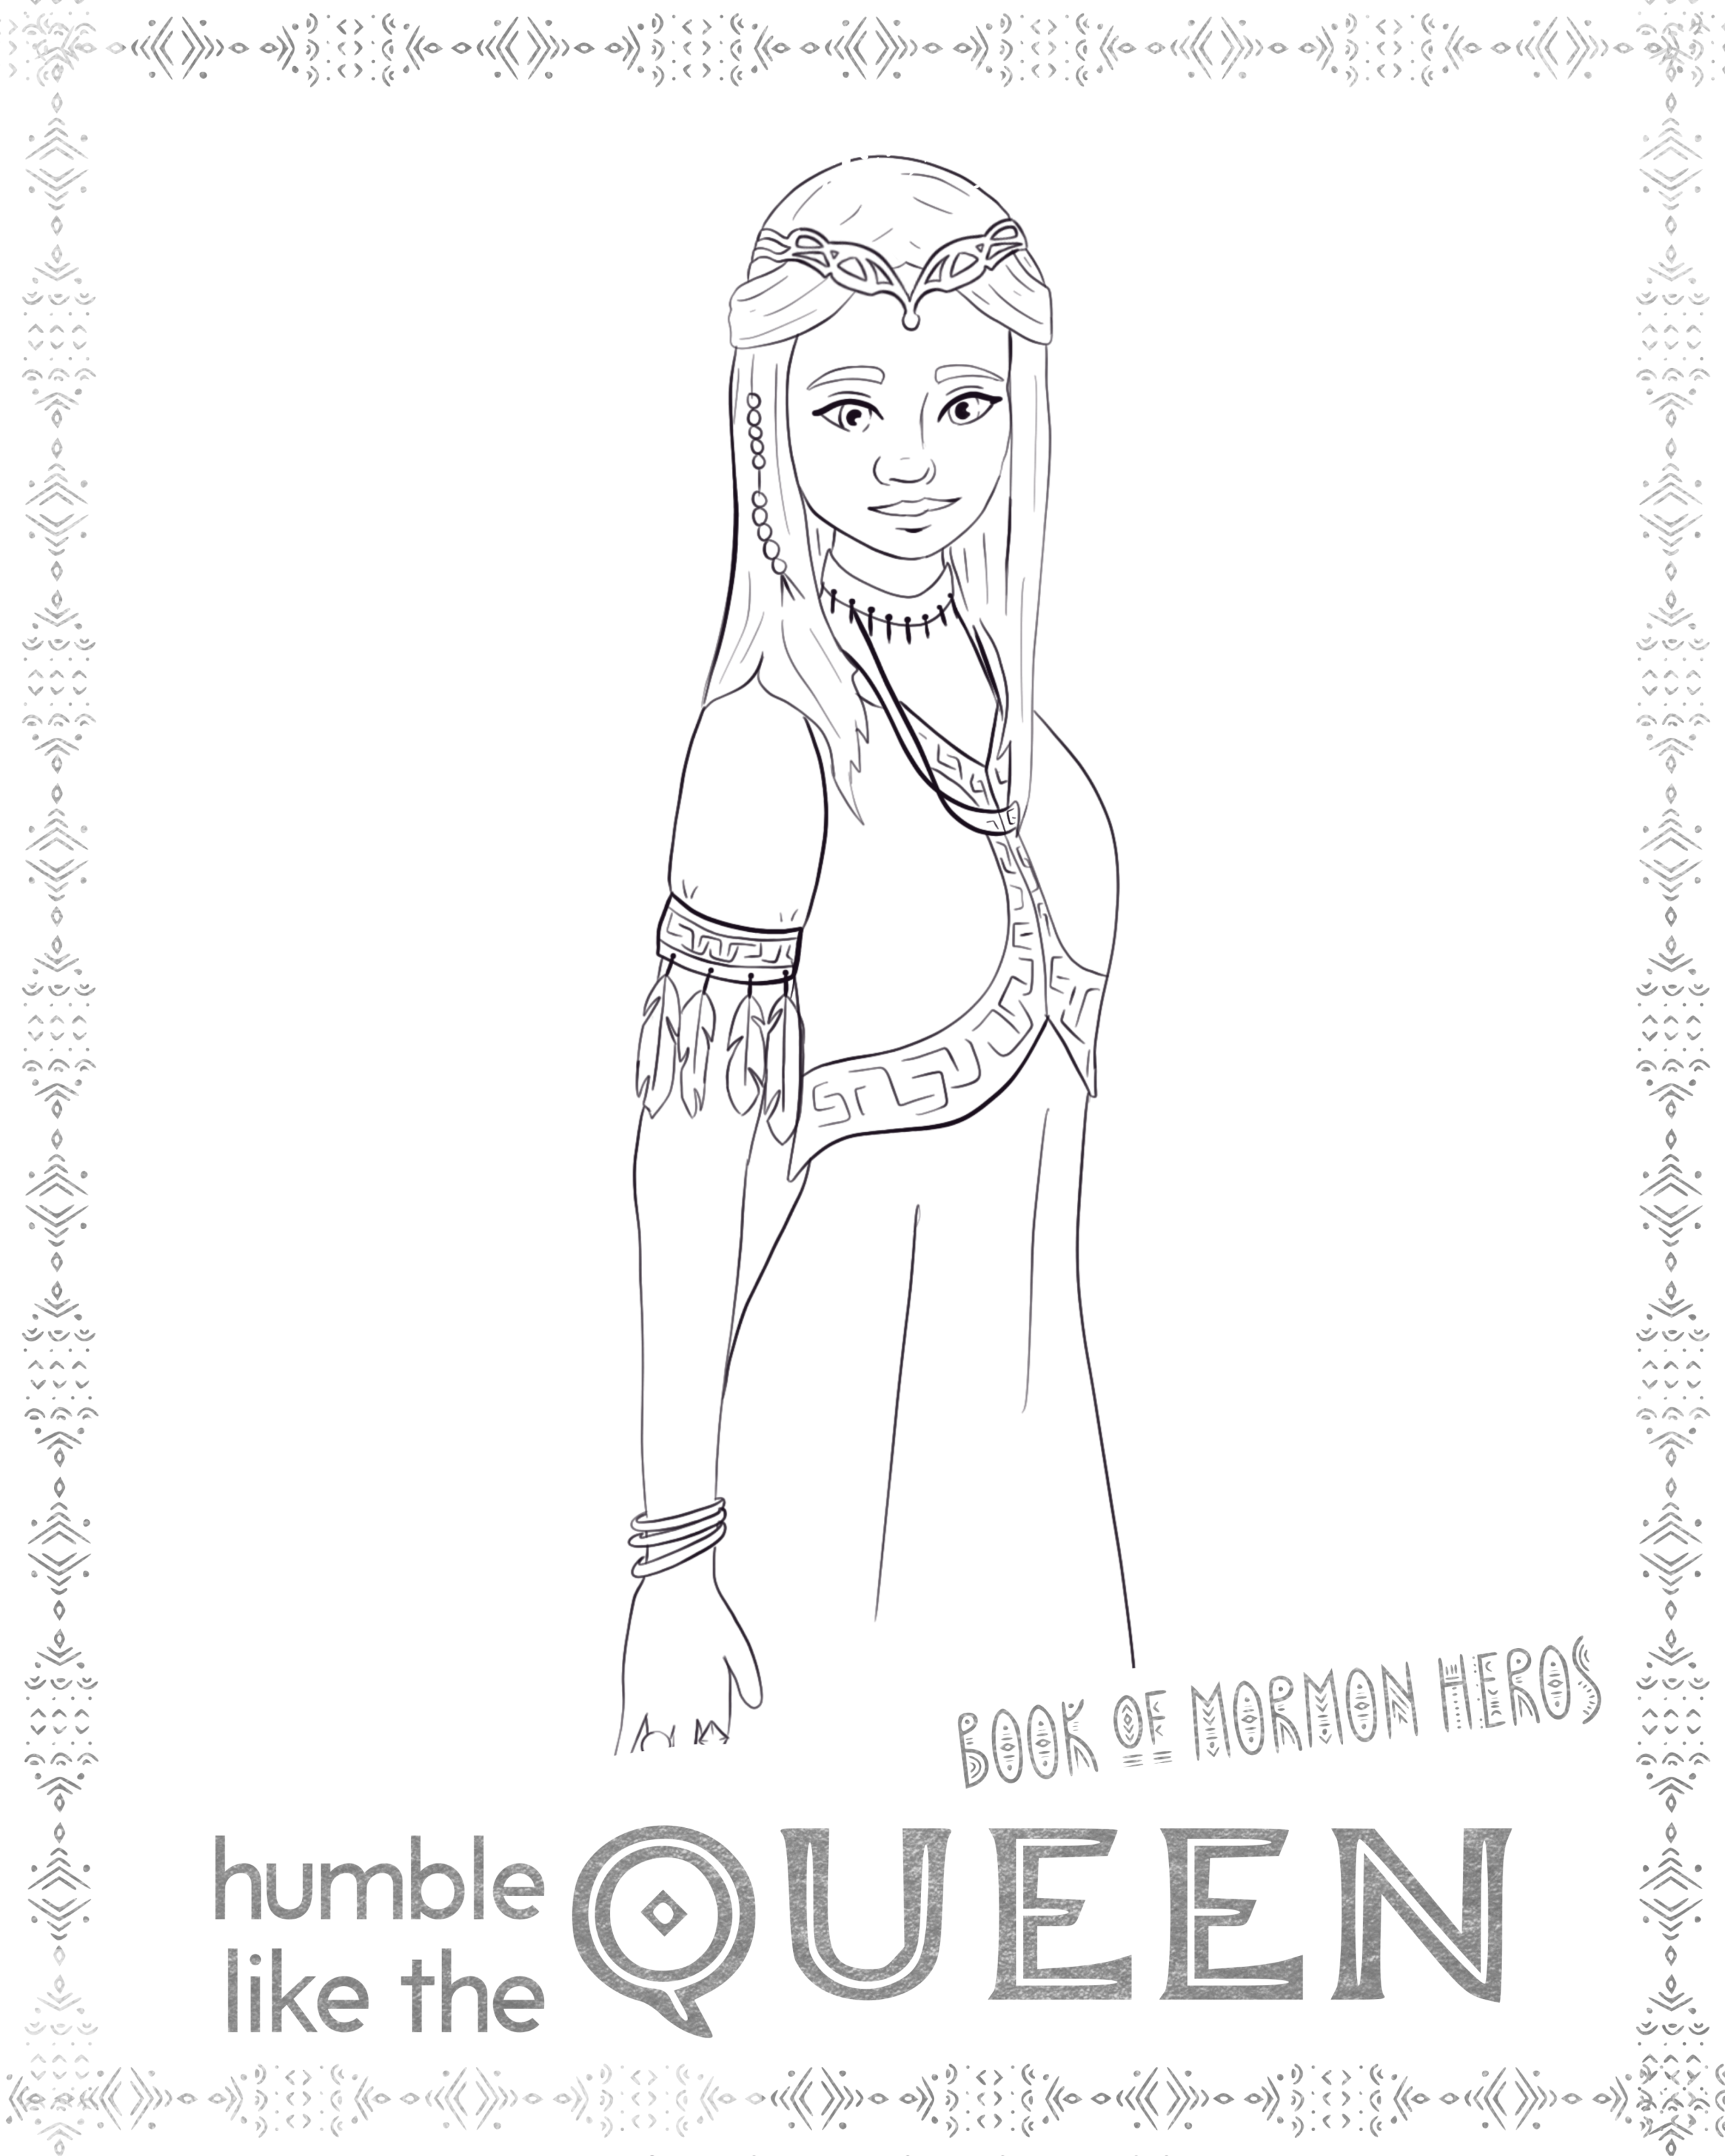 Book of mormon hero posters coloring pages